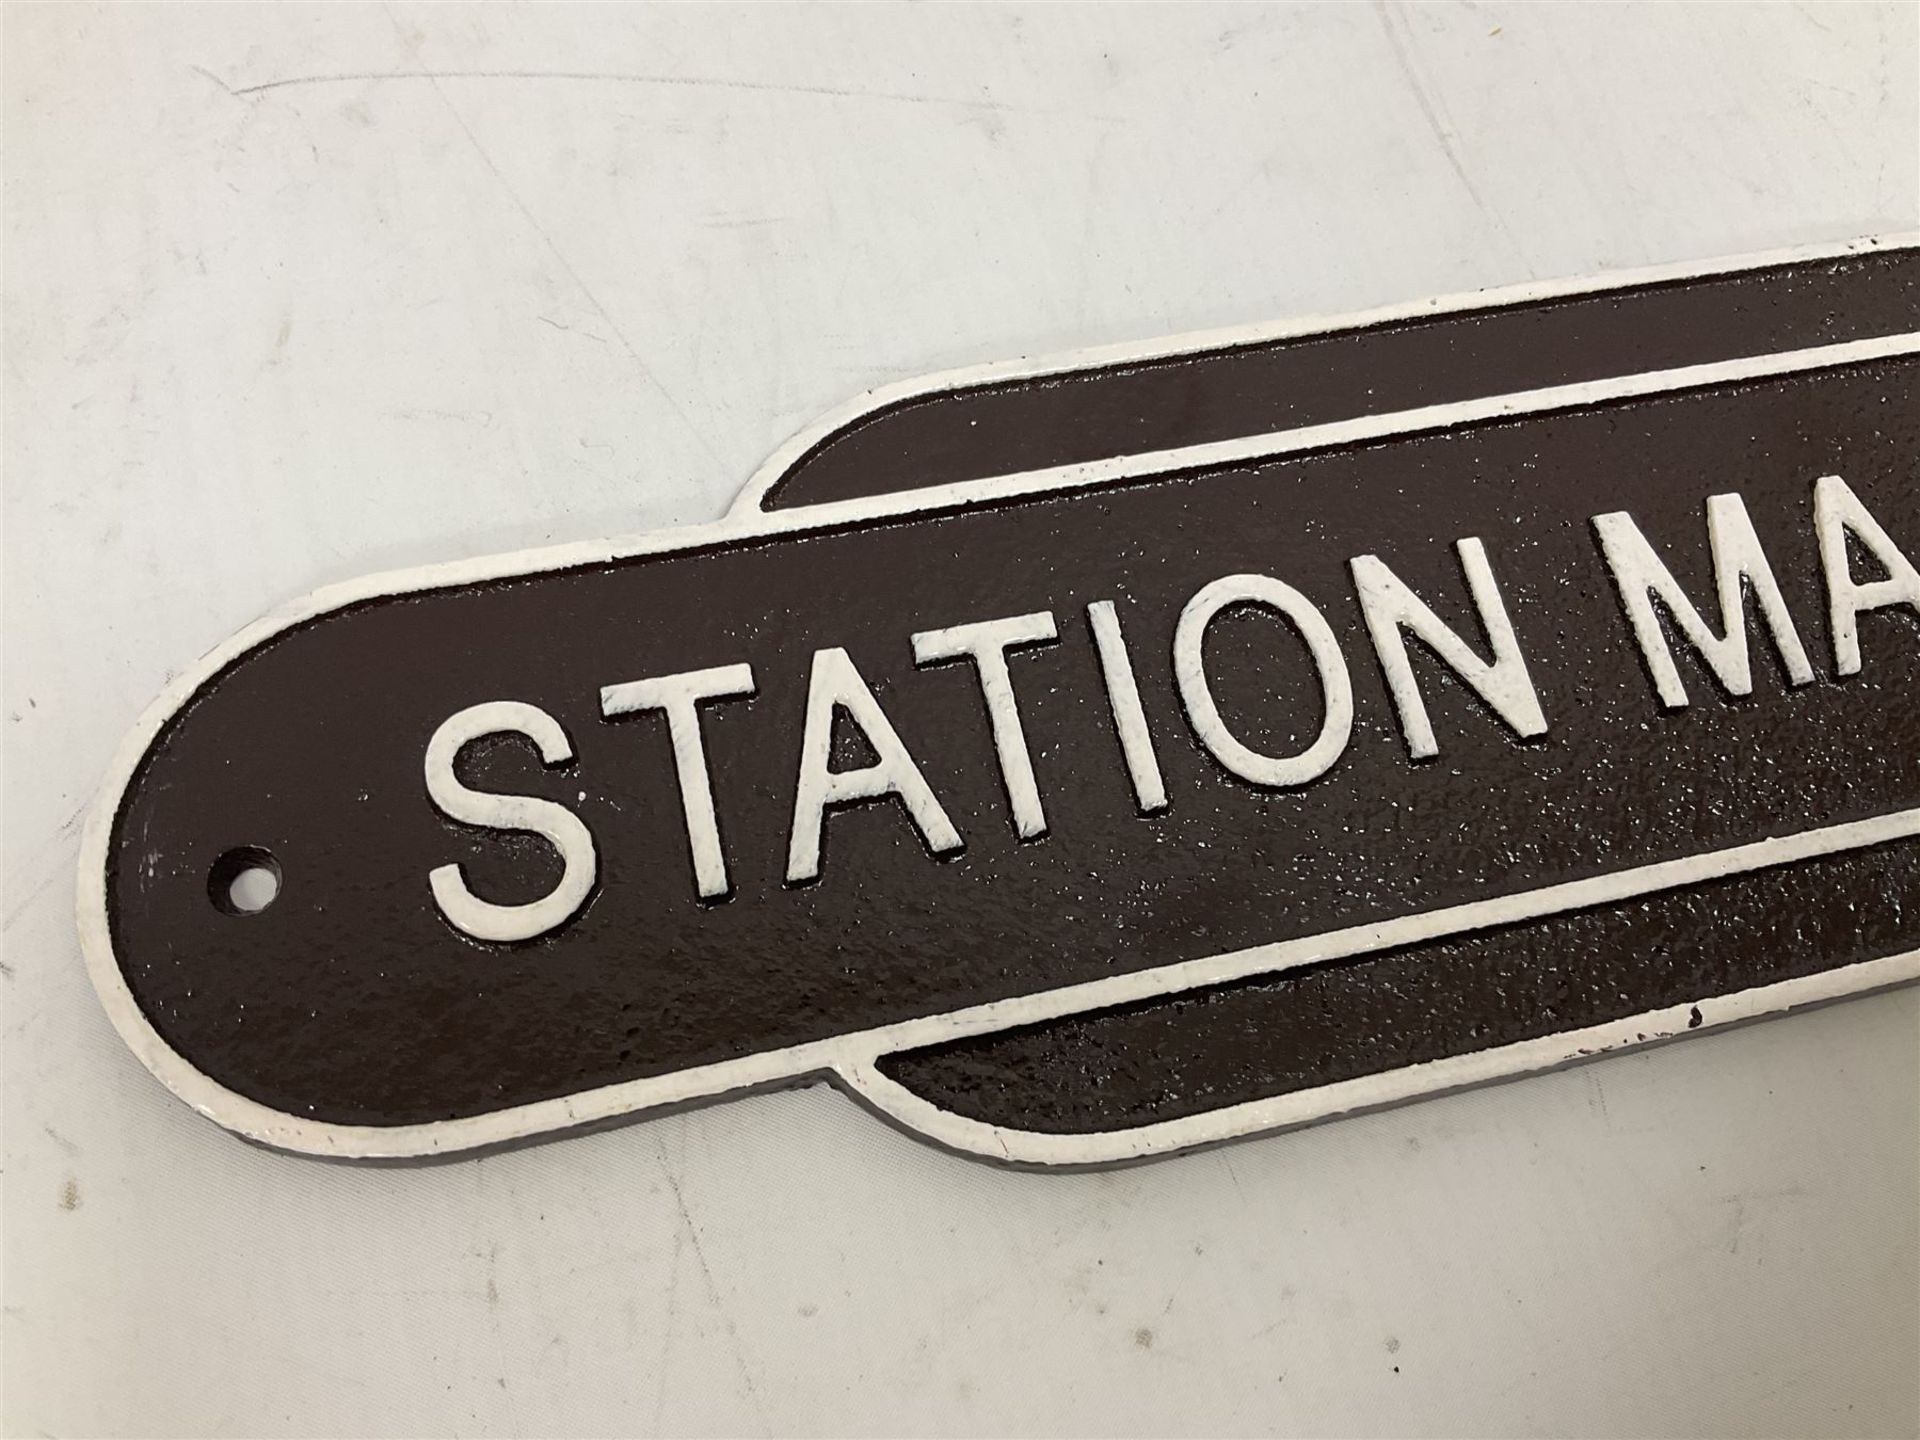 Cast iron Station Master wall plaque on a brown ground - Image 2 of 4